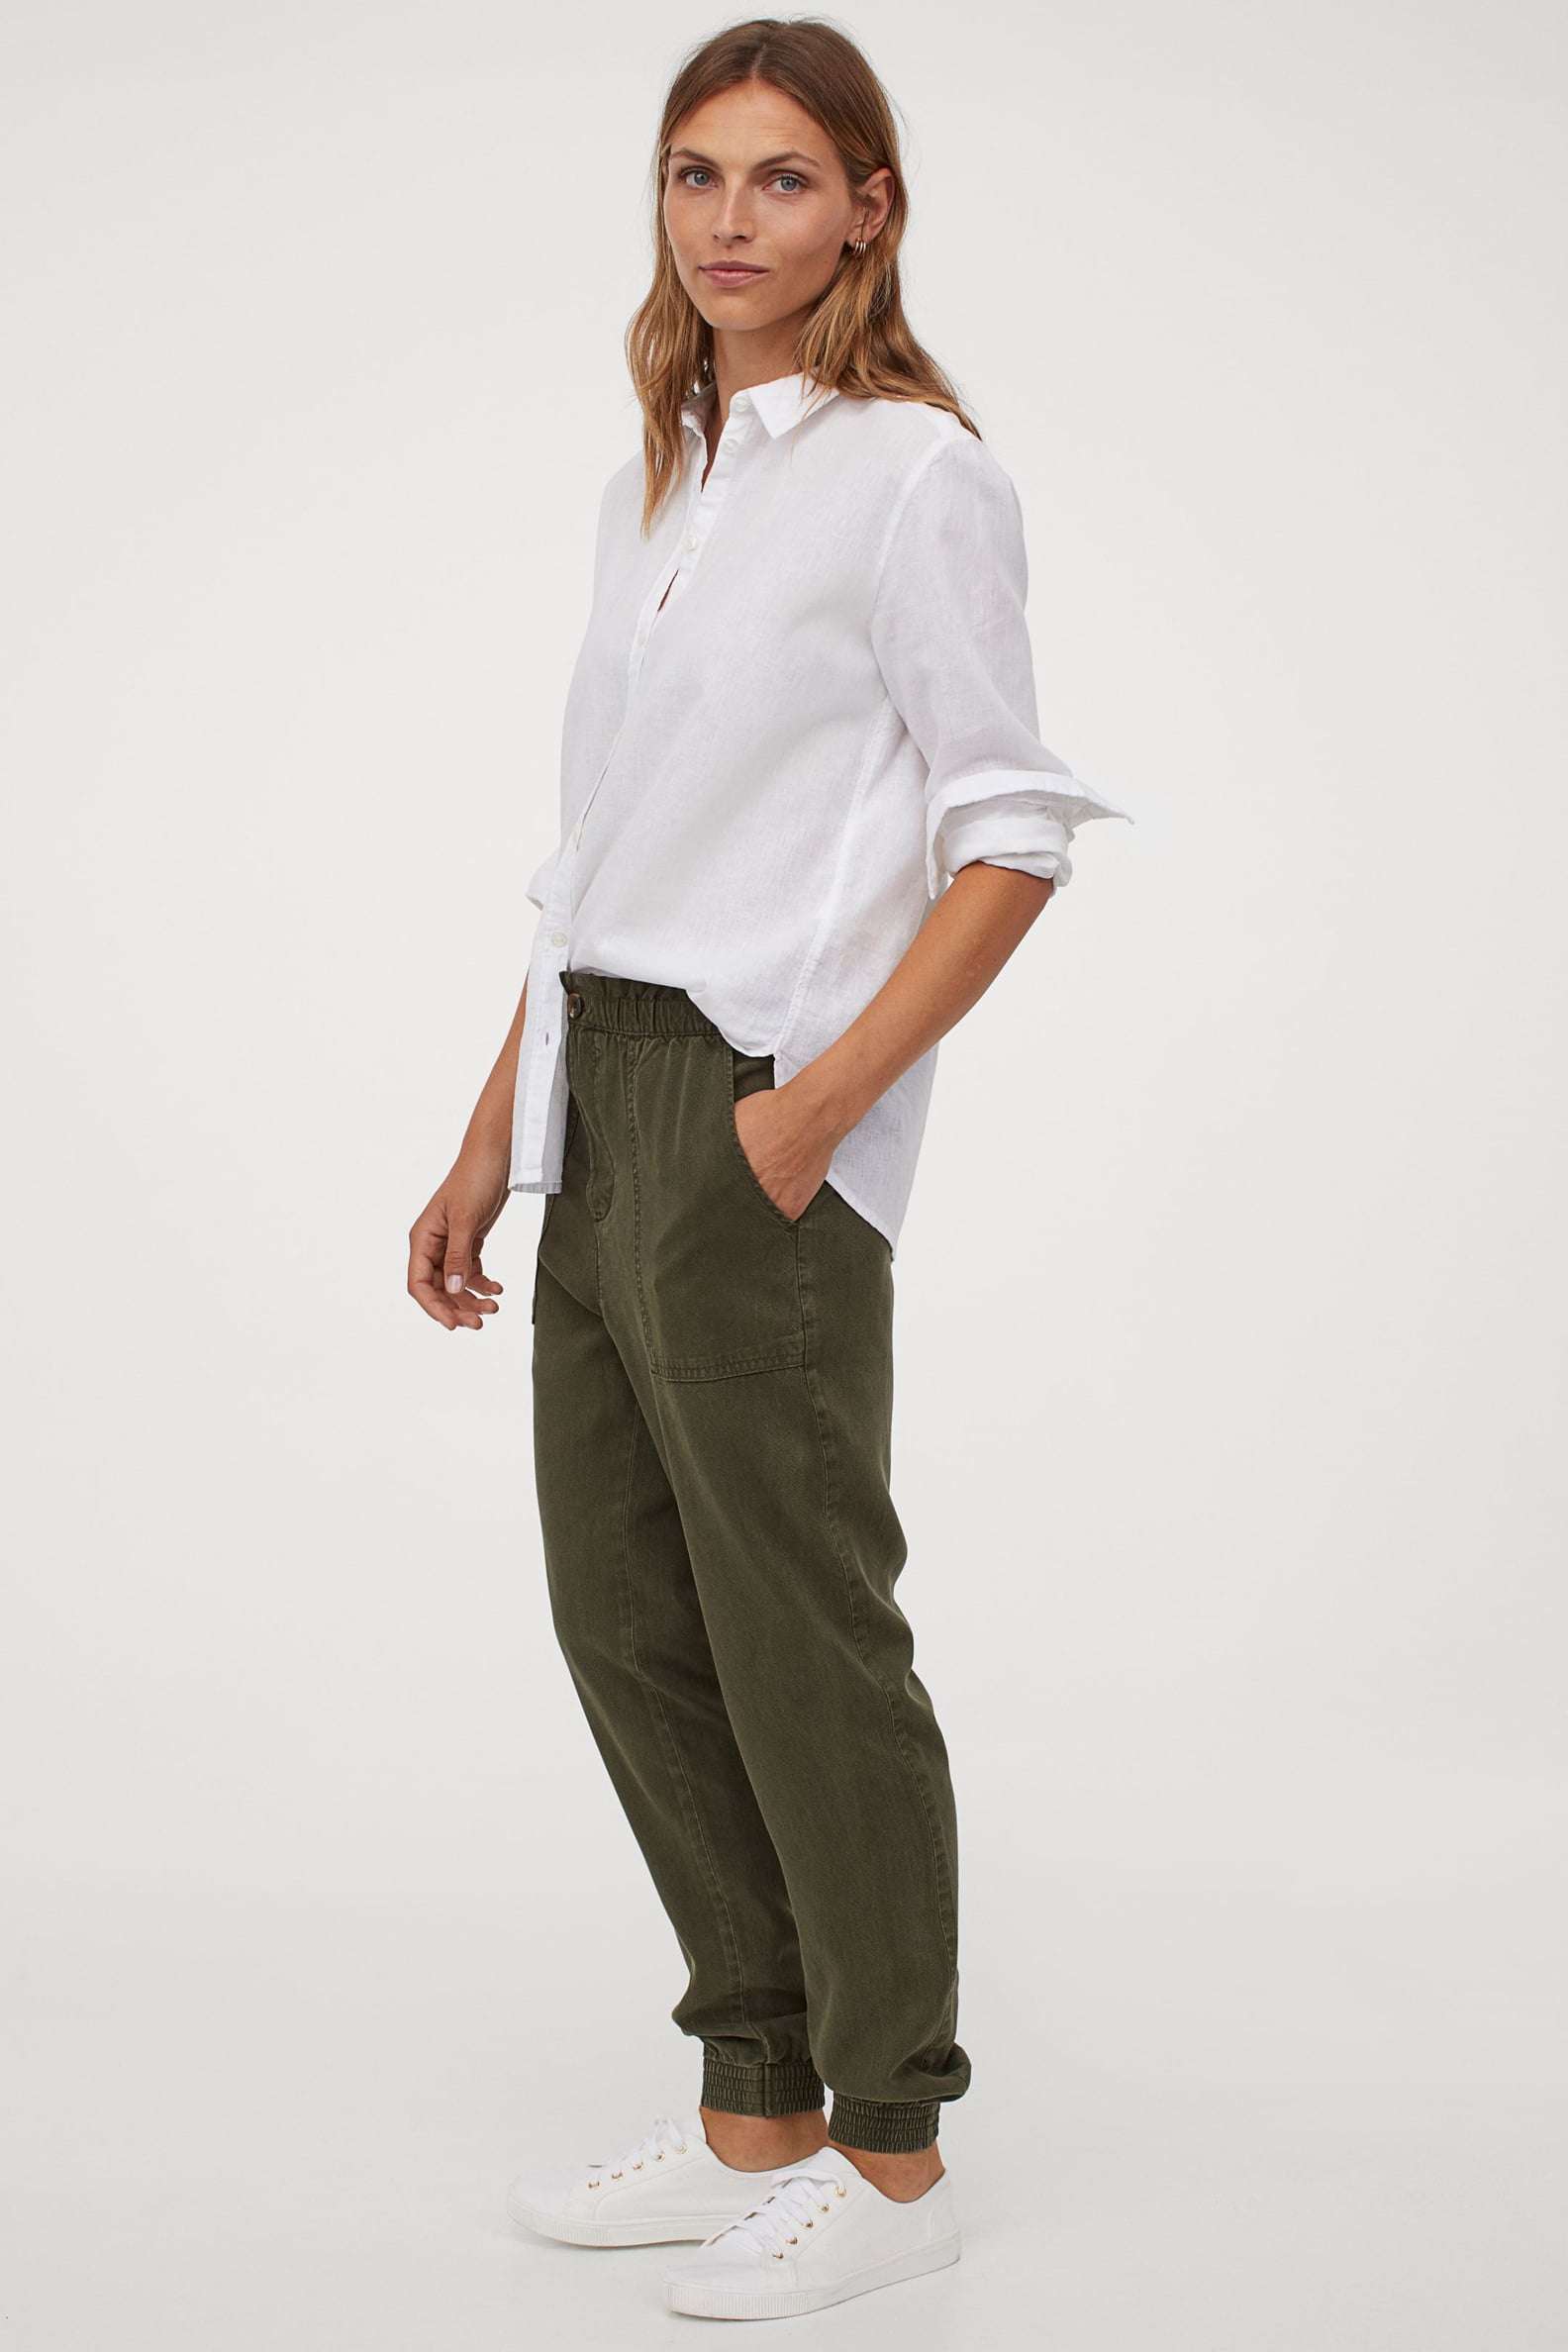 The Most Comfortable Pants From H&M | POPSUGAR Fashion